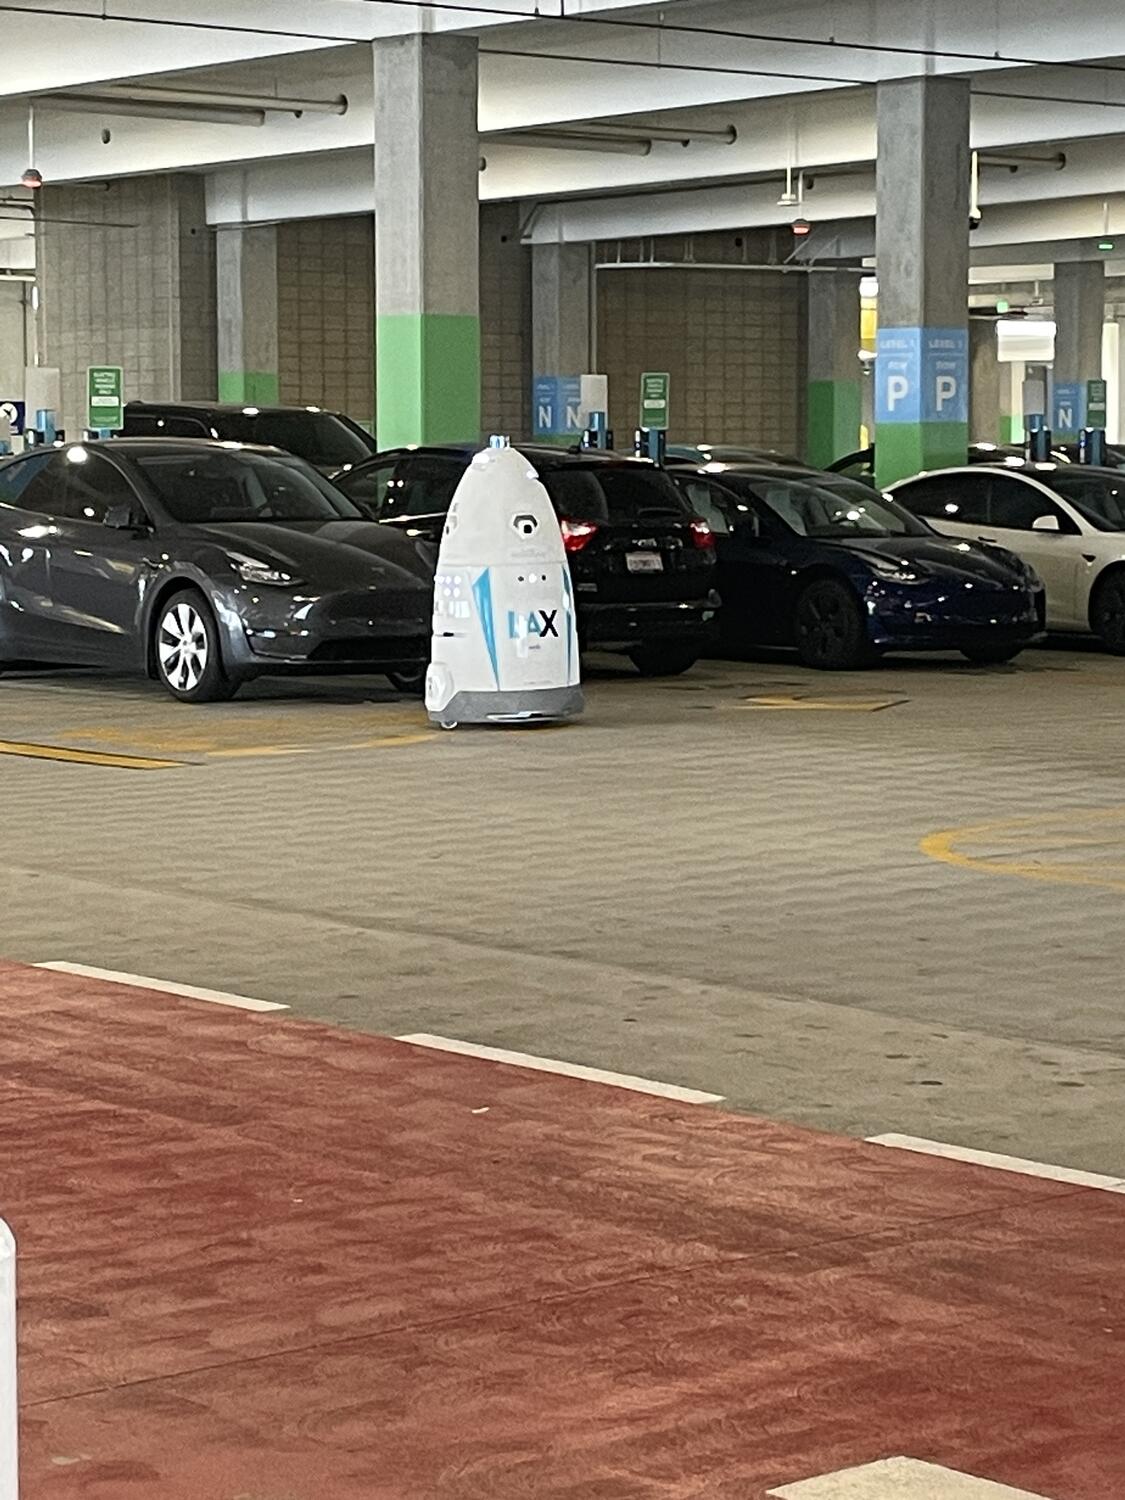 A roaming security robot in a parking lot